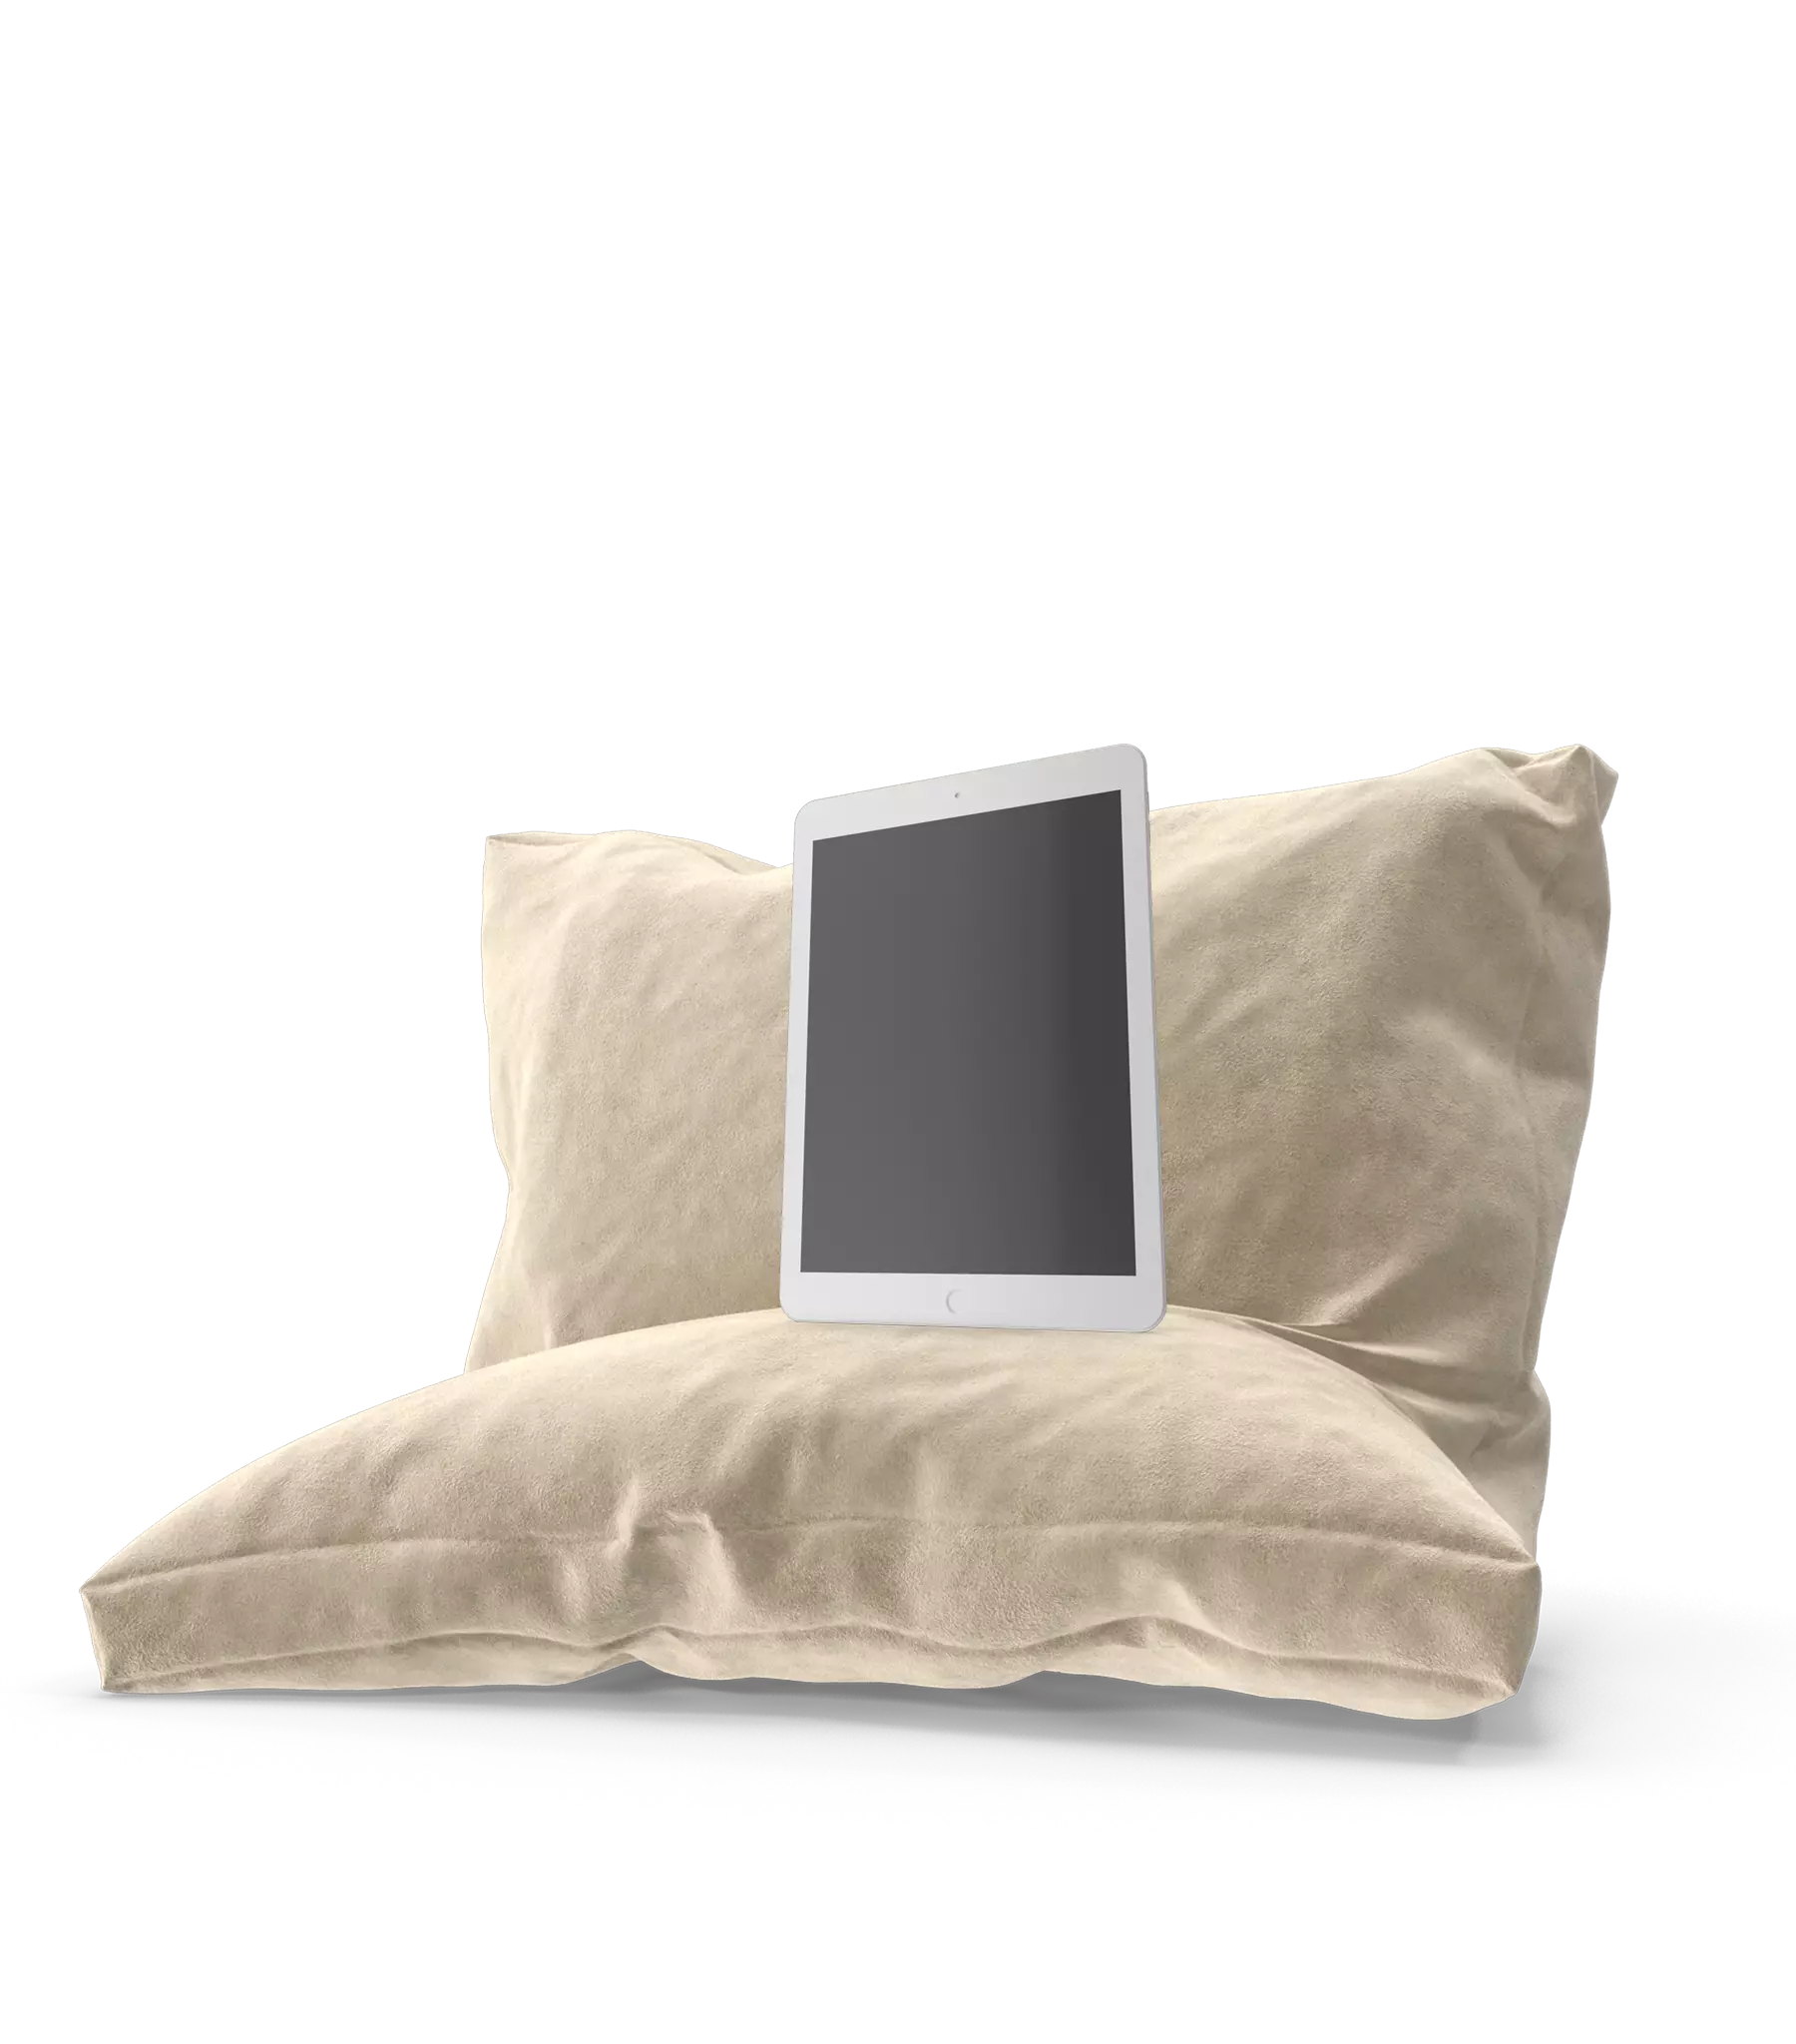 An iPad on a pillow as the Digital Wellbeing quickcard header image